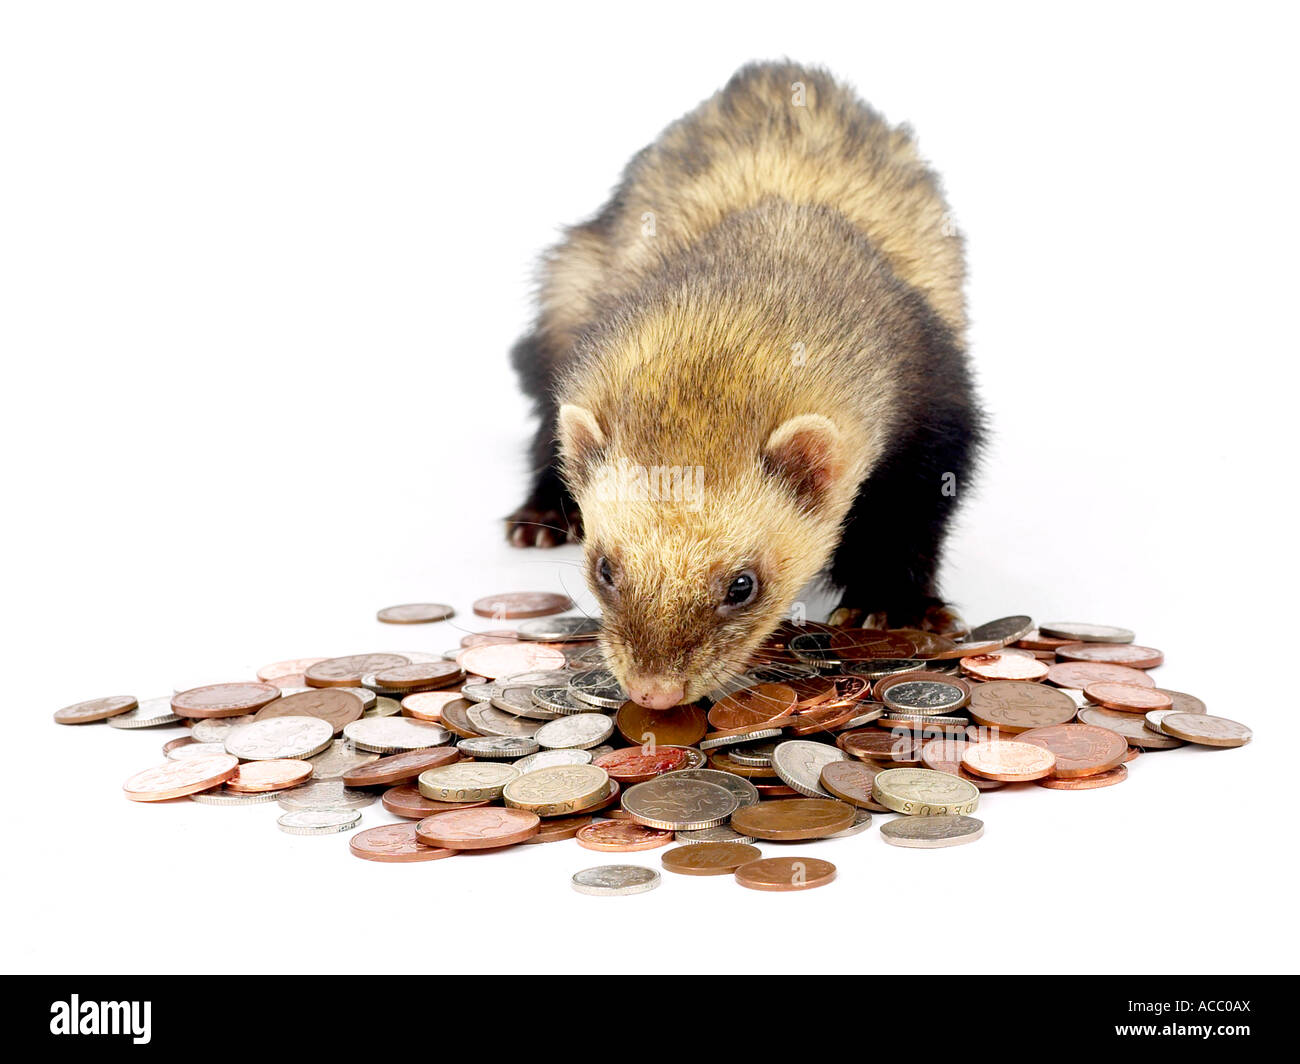 A polecat ferret surround by coins and money. Stock Photo